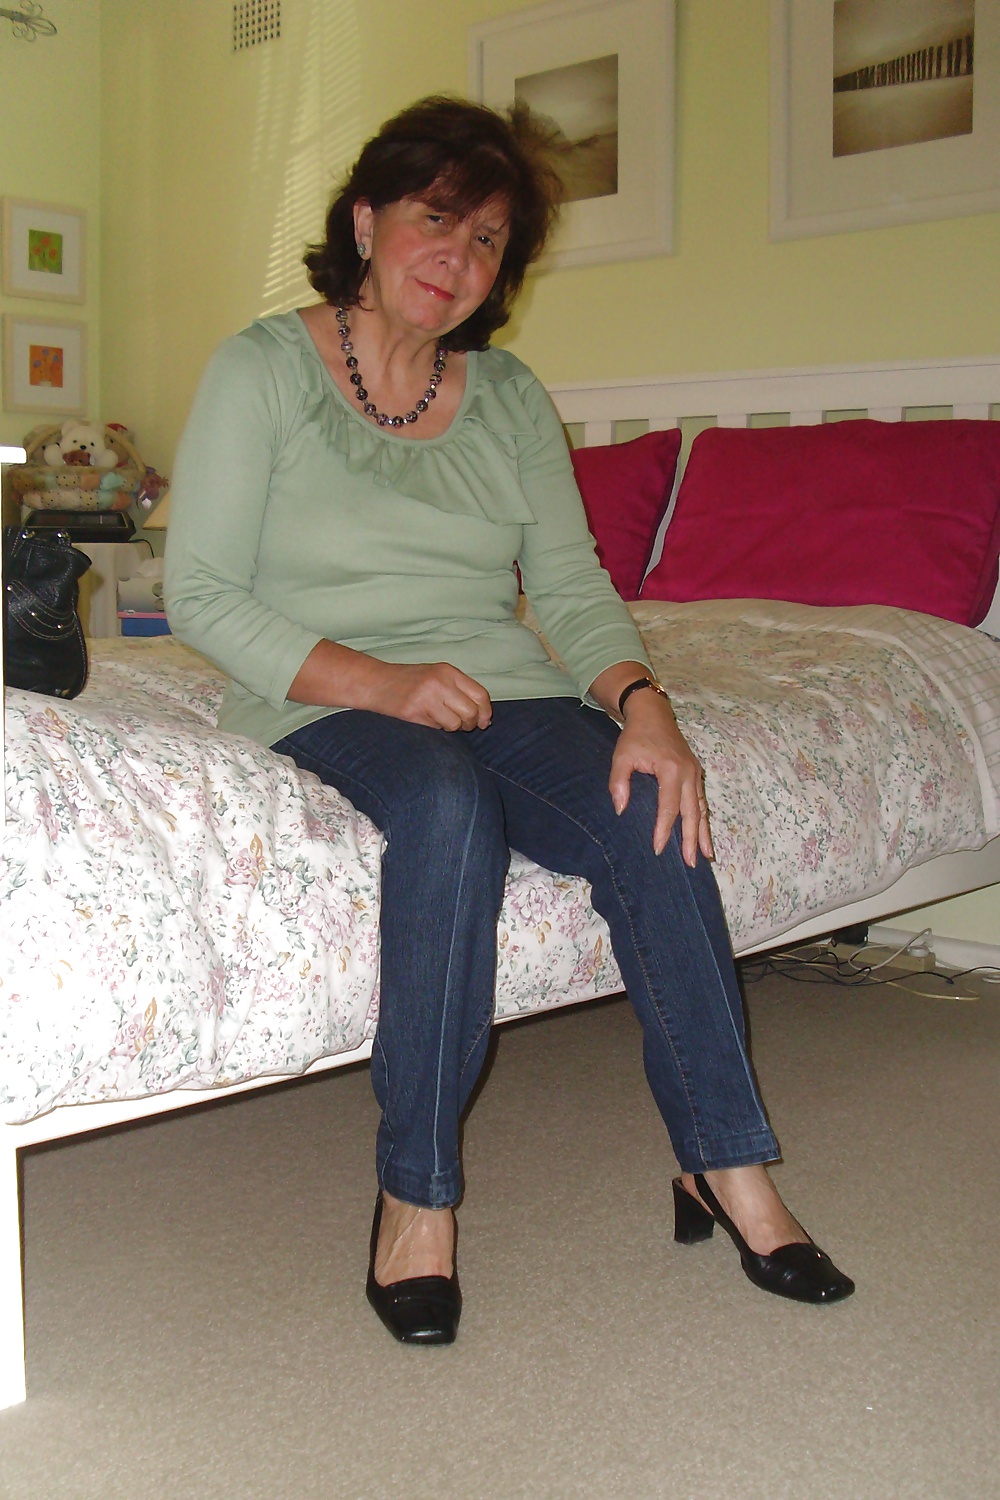 Rosemary sexy 63 year old clothed #28210720